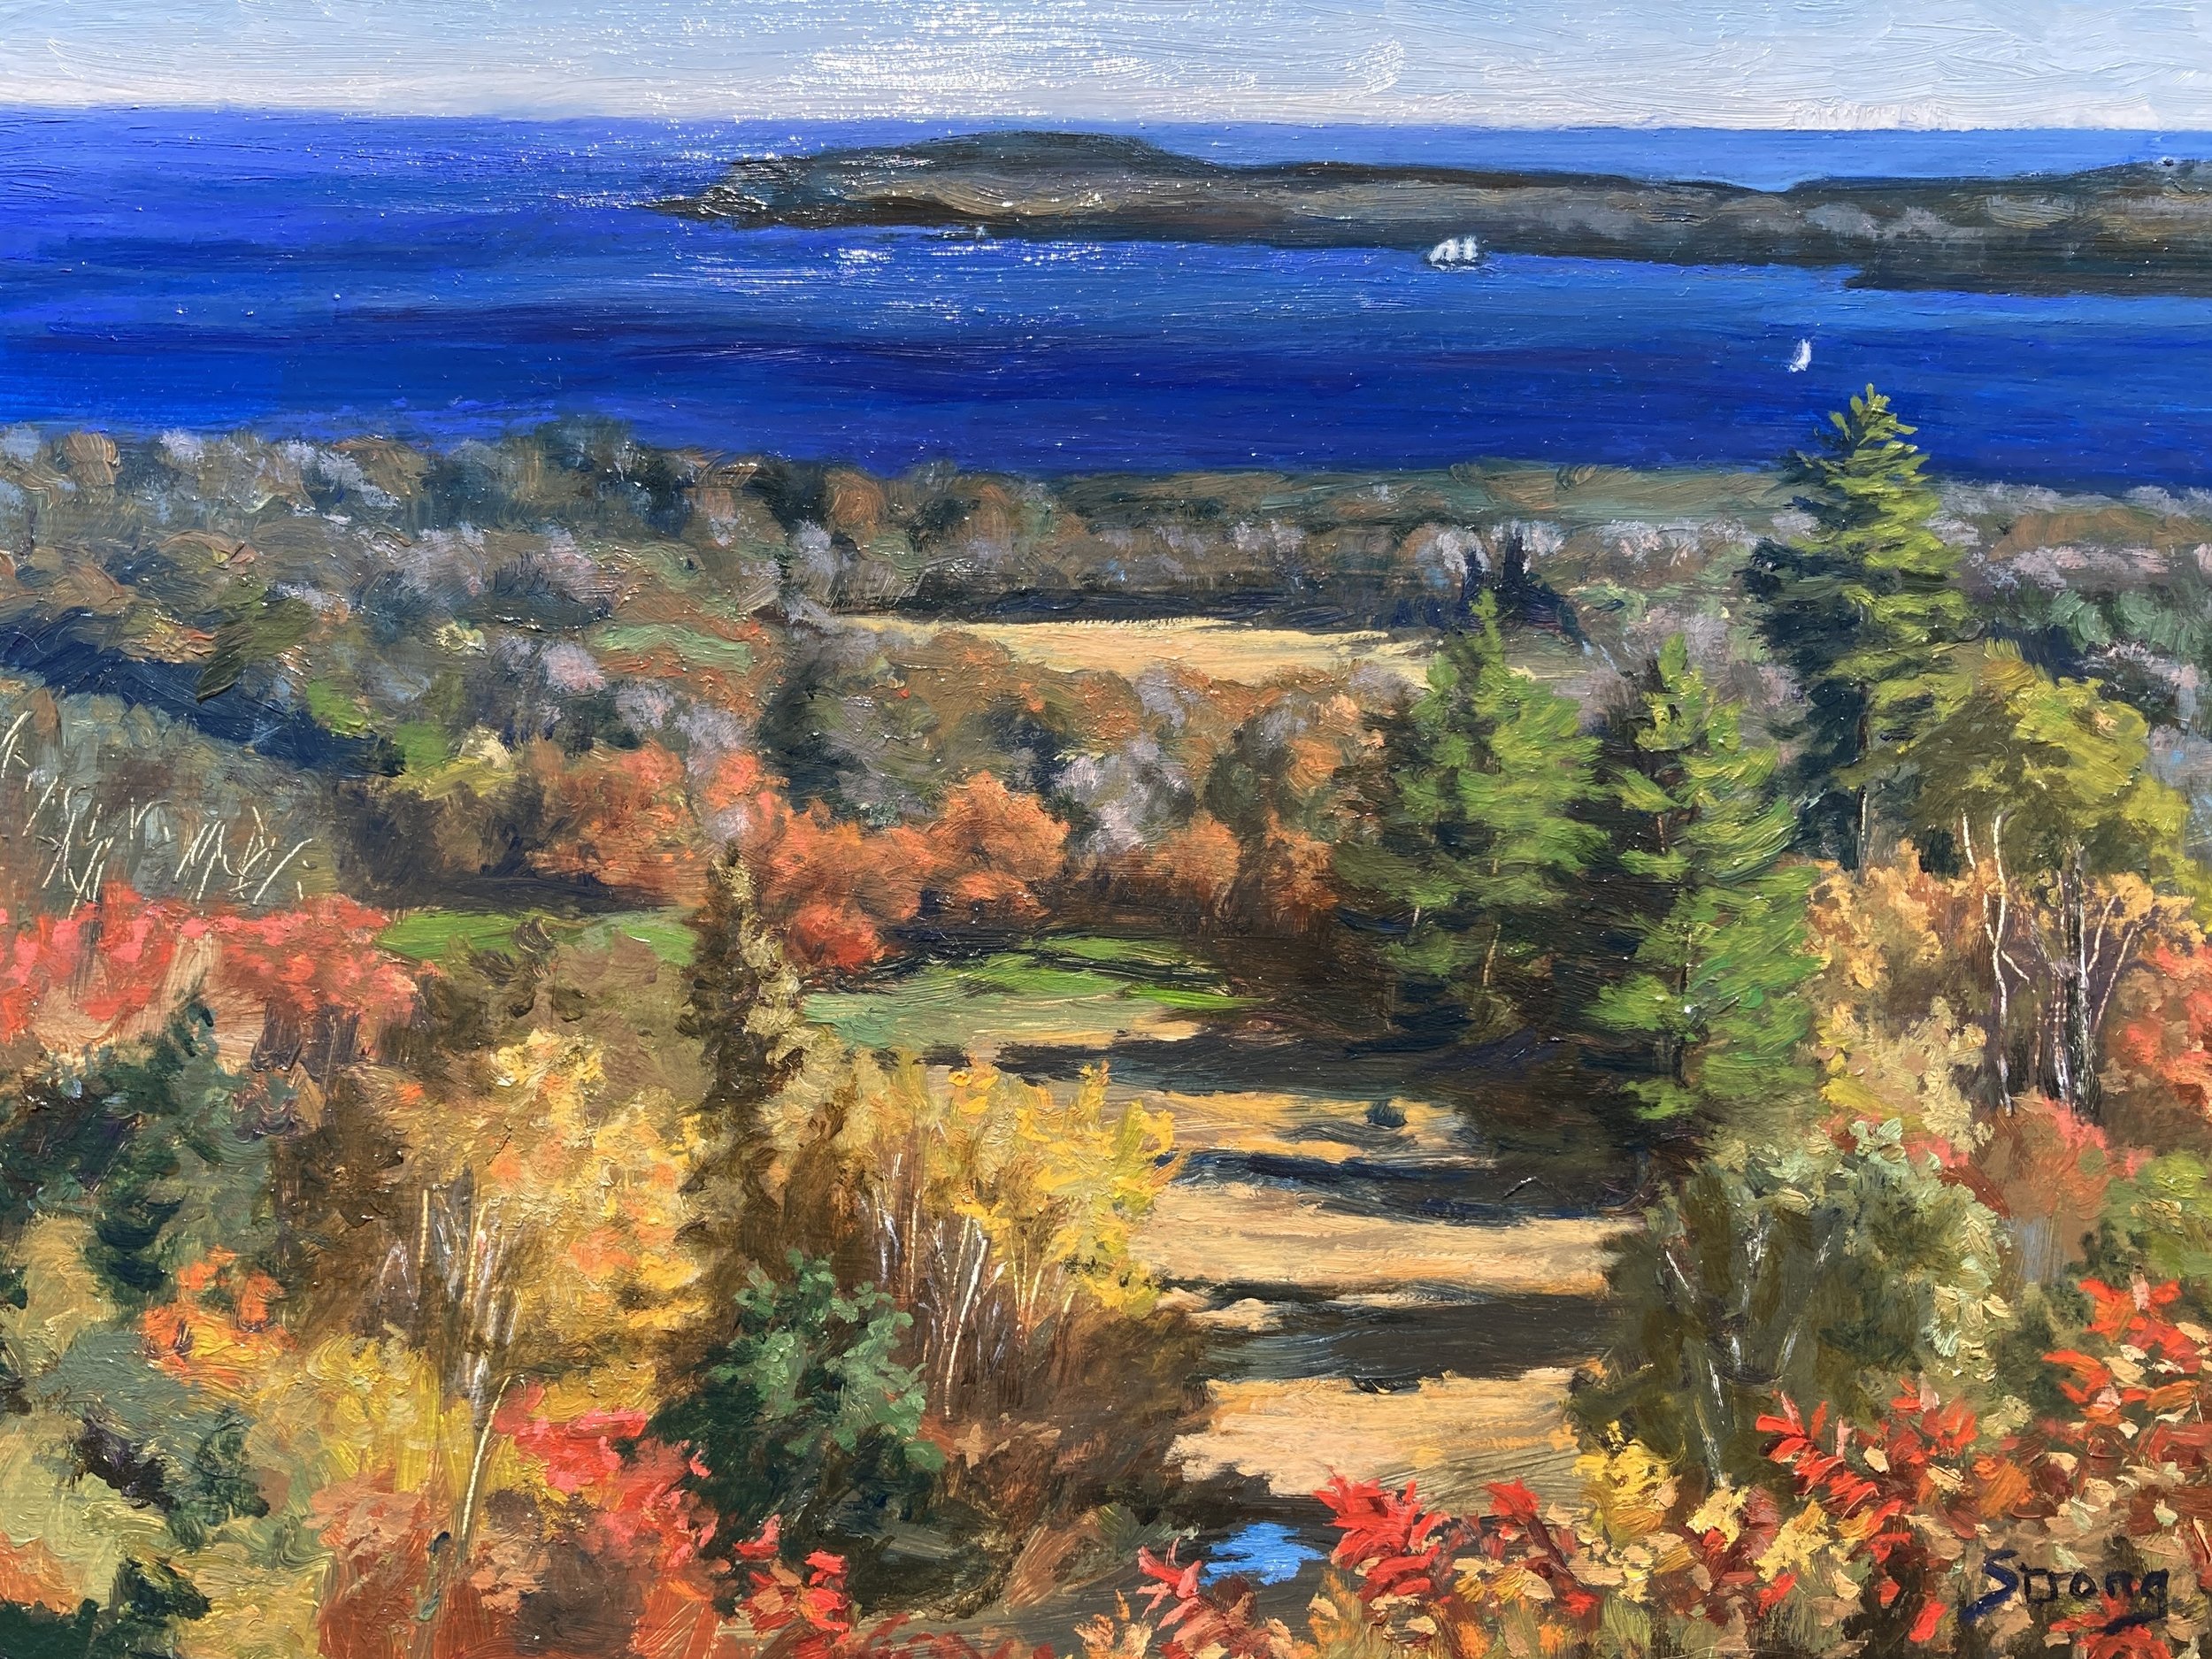 "View from Bear Mountain", 11" x 14", oil on panel